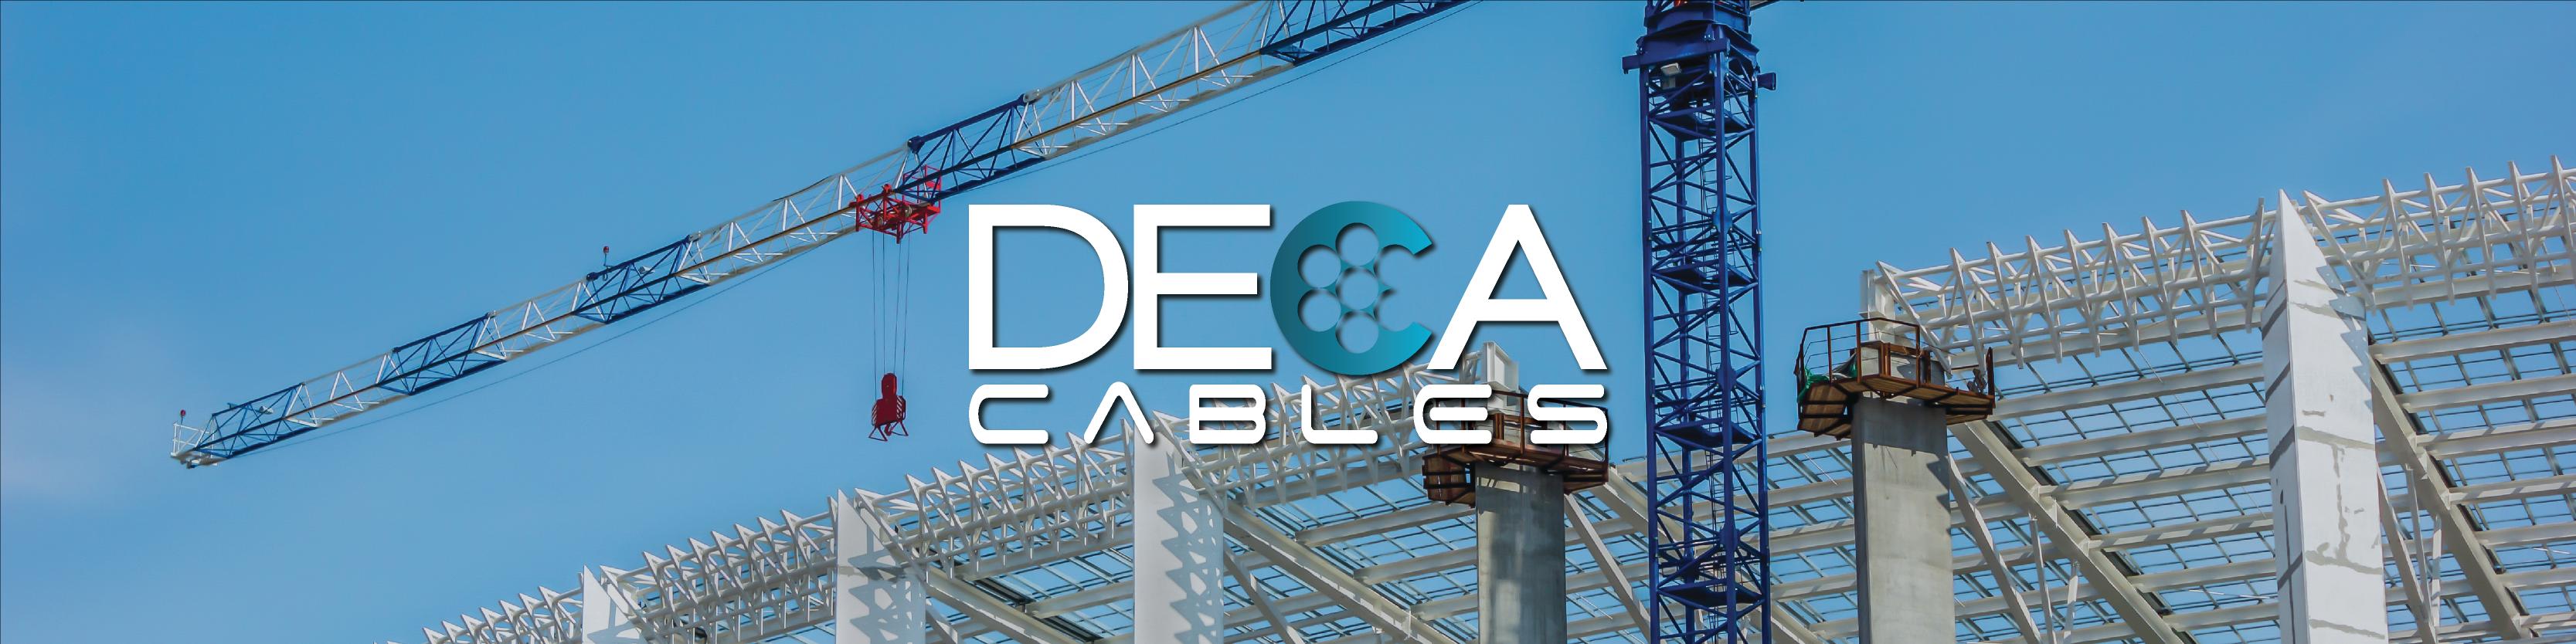 Featured Suppliers Banner Image - Deca Cables